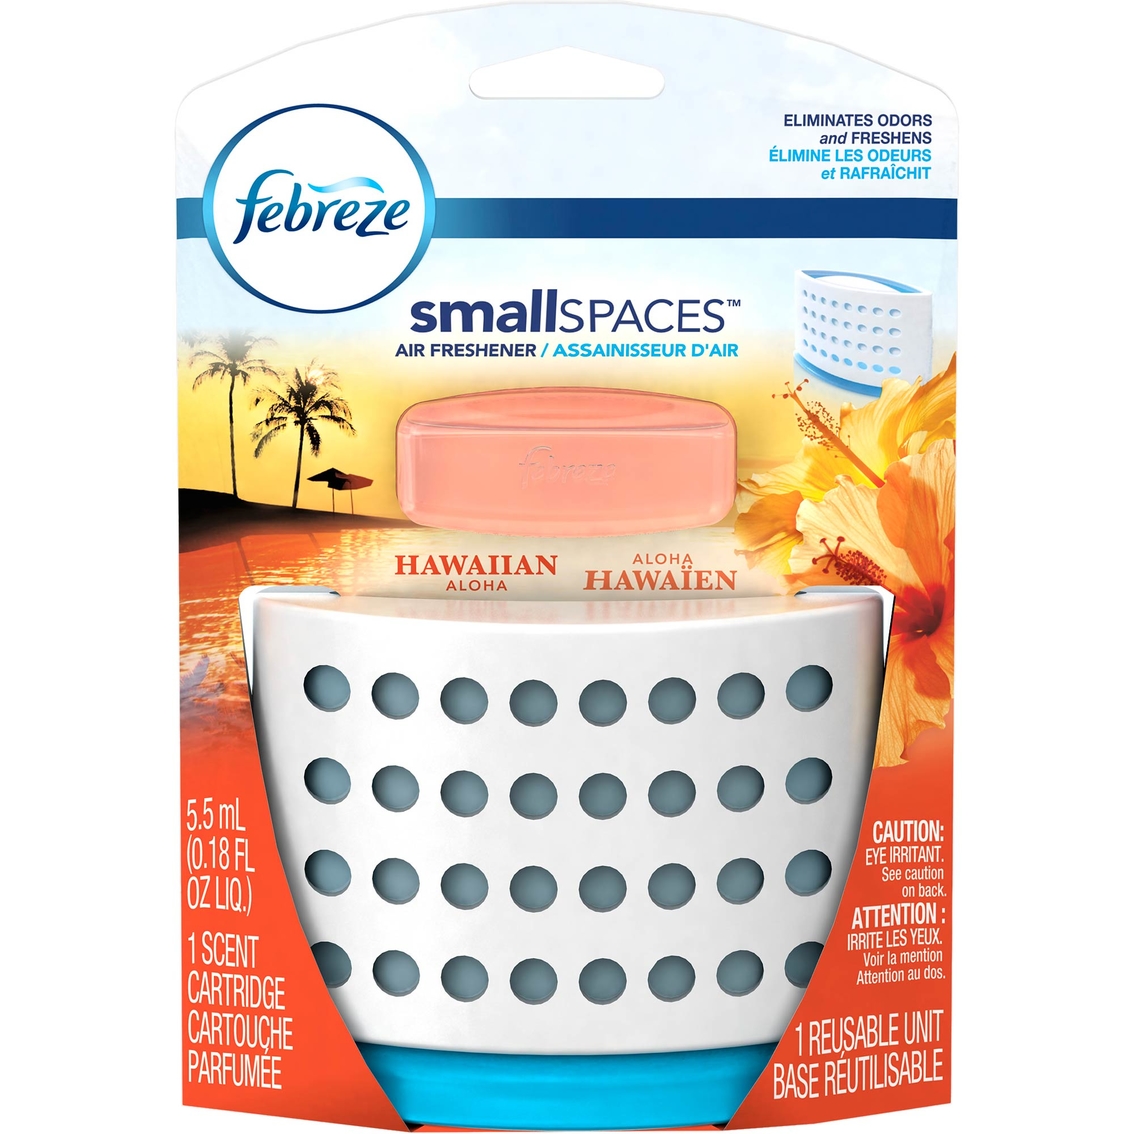 Save on Febreze Car Hawaiian Aloha Vent Clip Air Freshener Order Online  Delivery